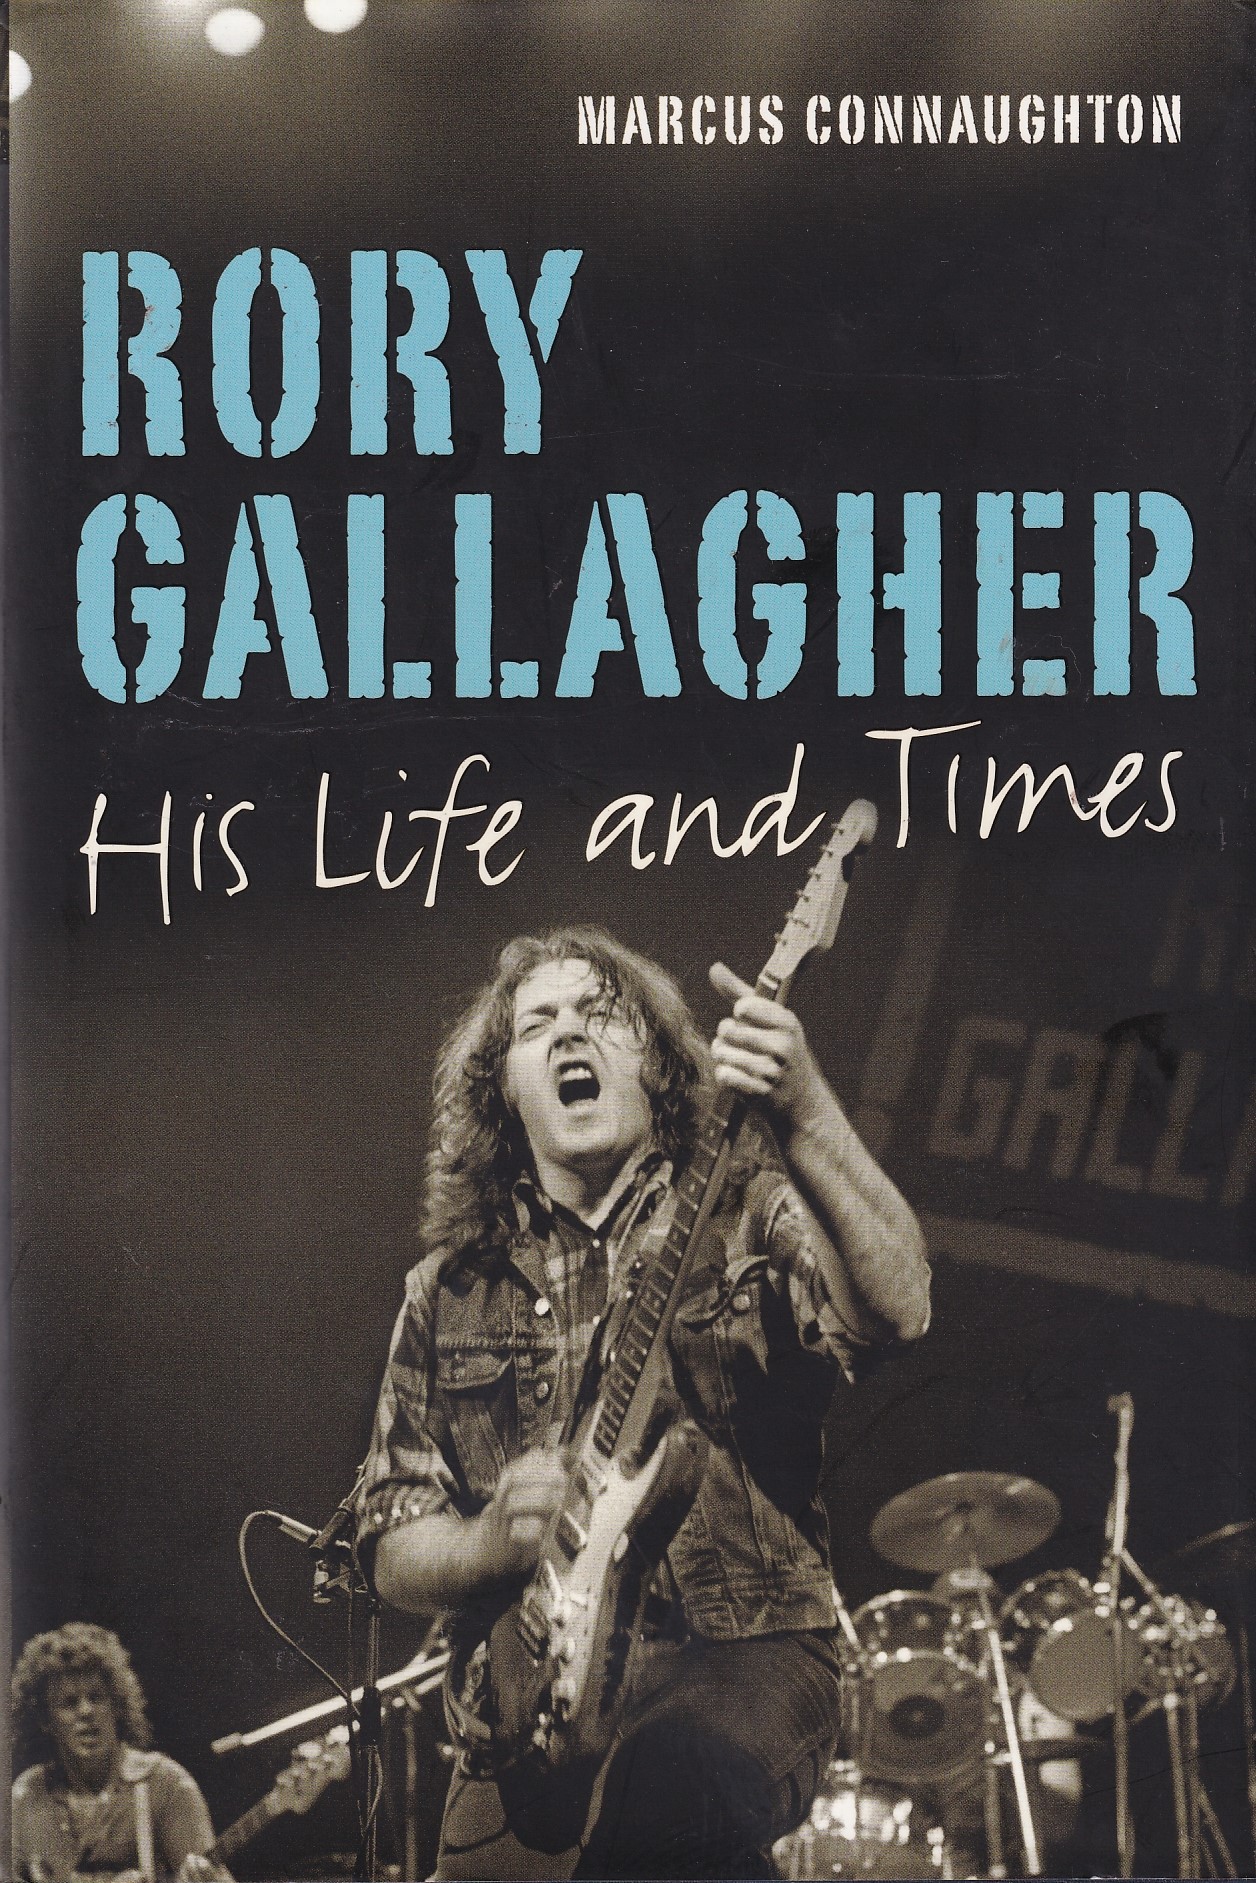 Rory Gallagher: His Life and Times | Marcus Connaughton | Charlie Byrne's